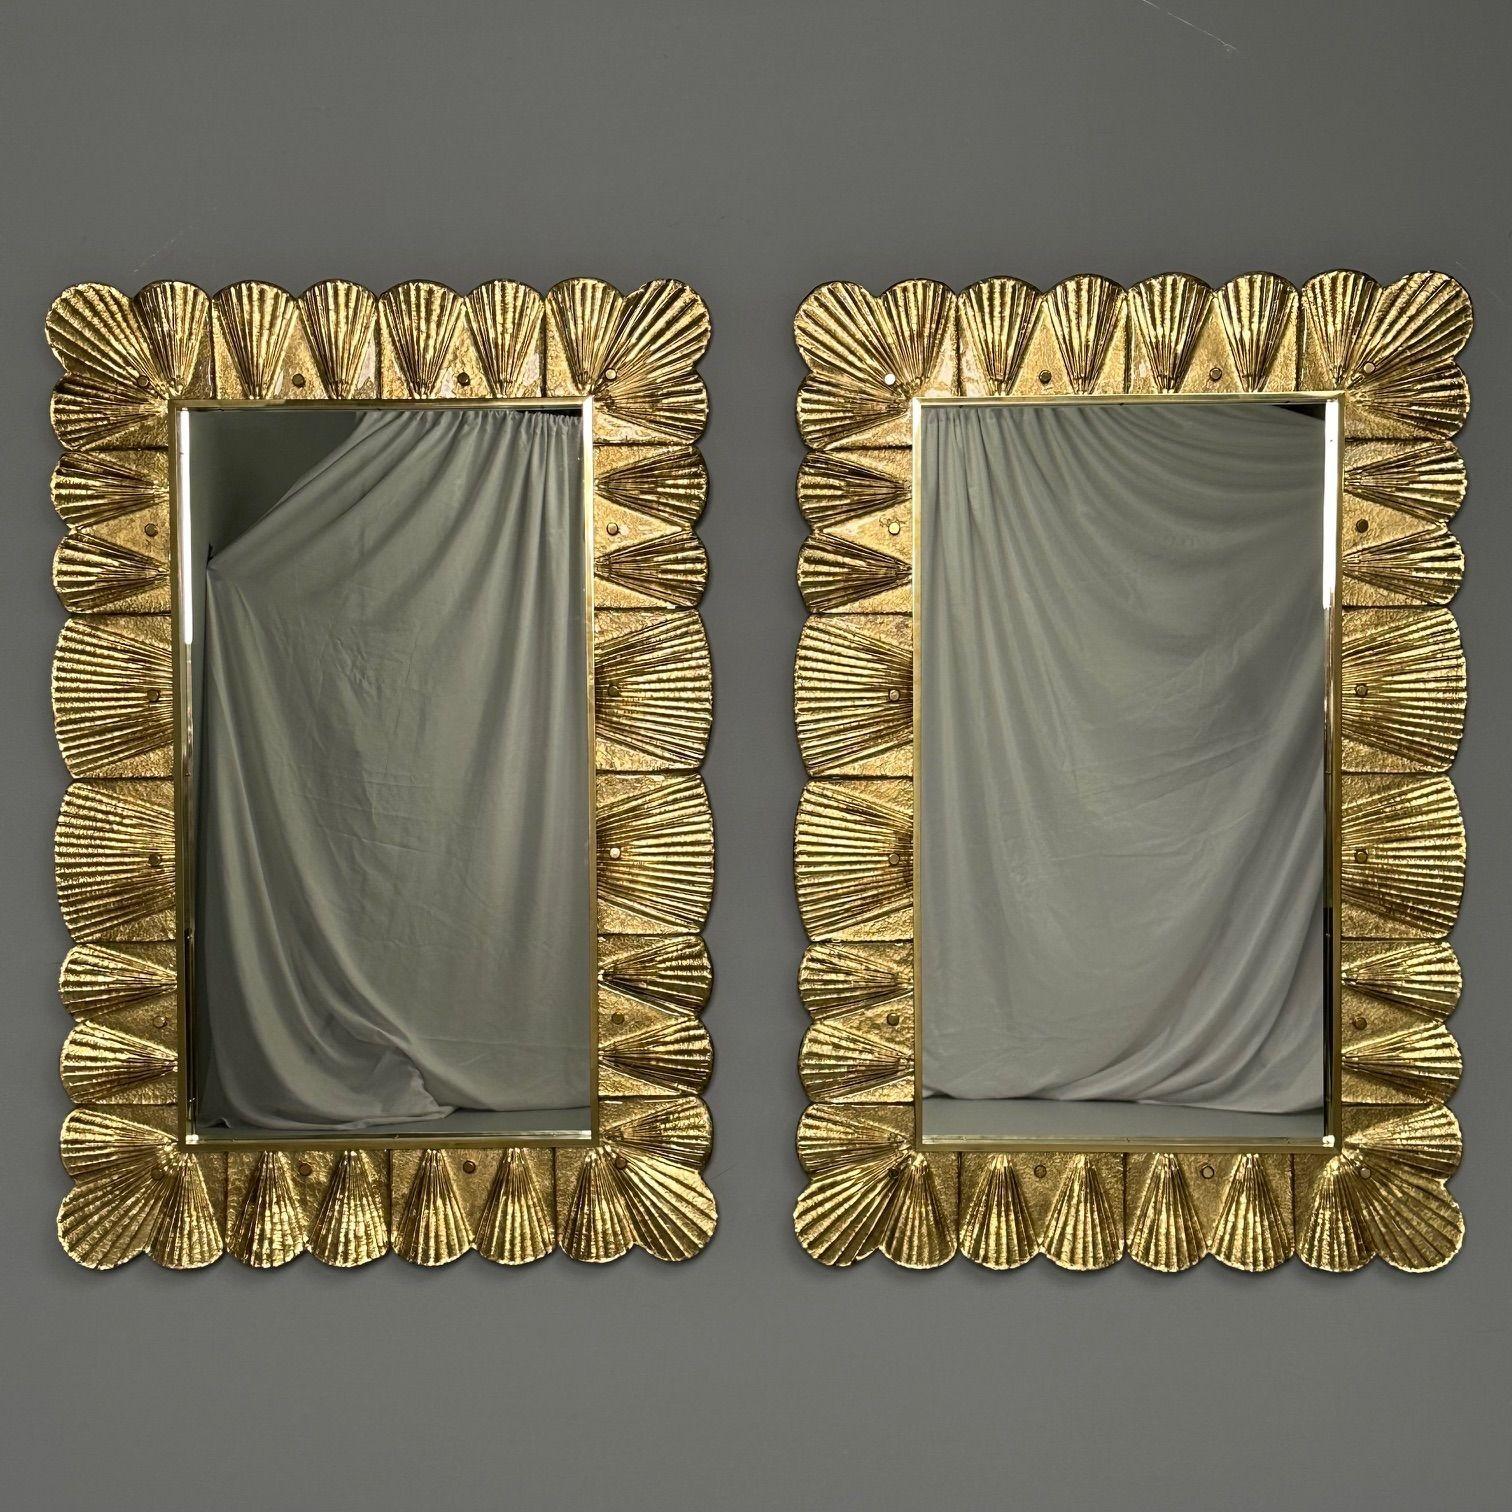 Contemporary, Wall Mirrors, Scallop Motif, Murano Glass, Gold Gilt, Italy, 2023 For Sale 6